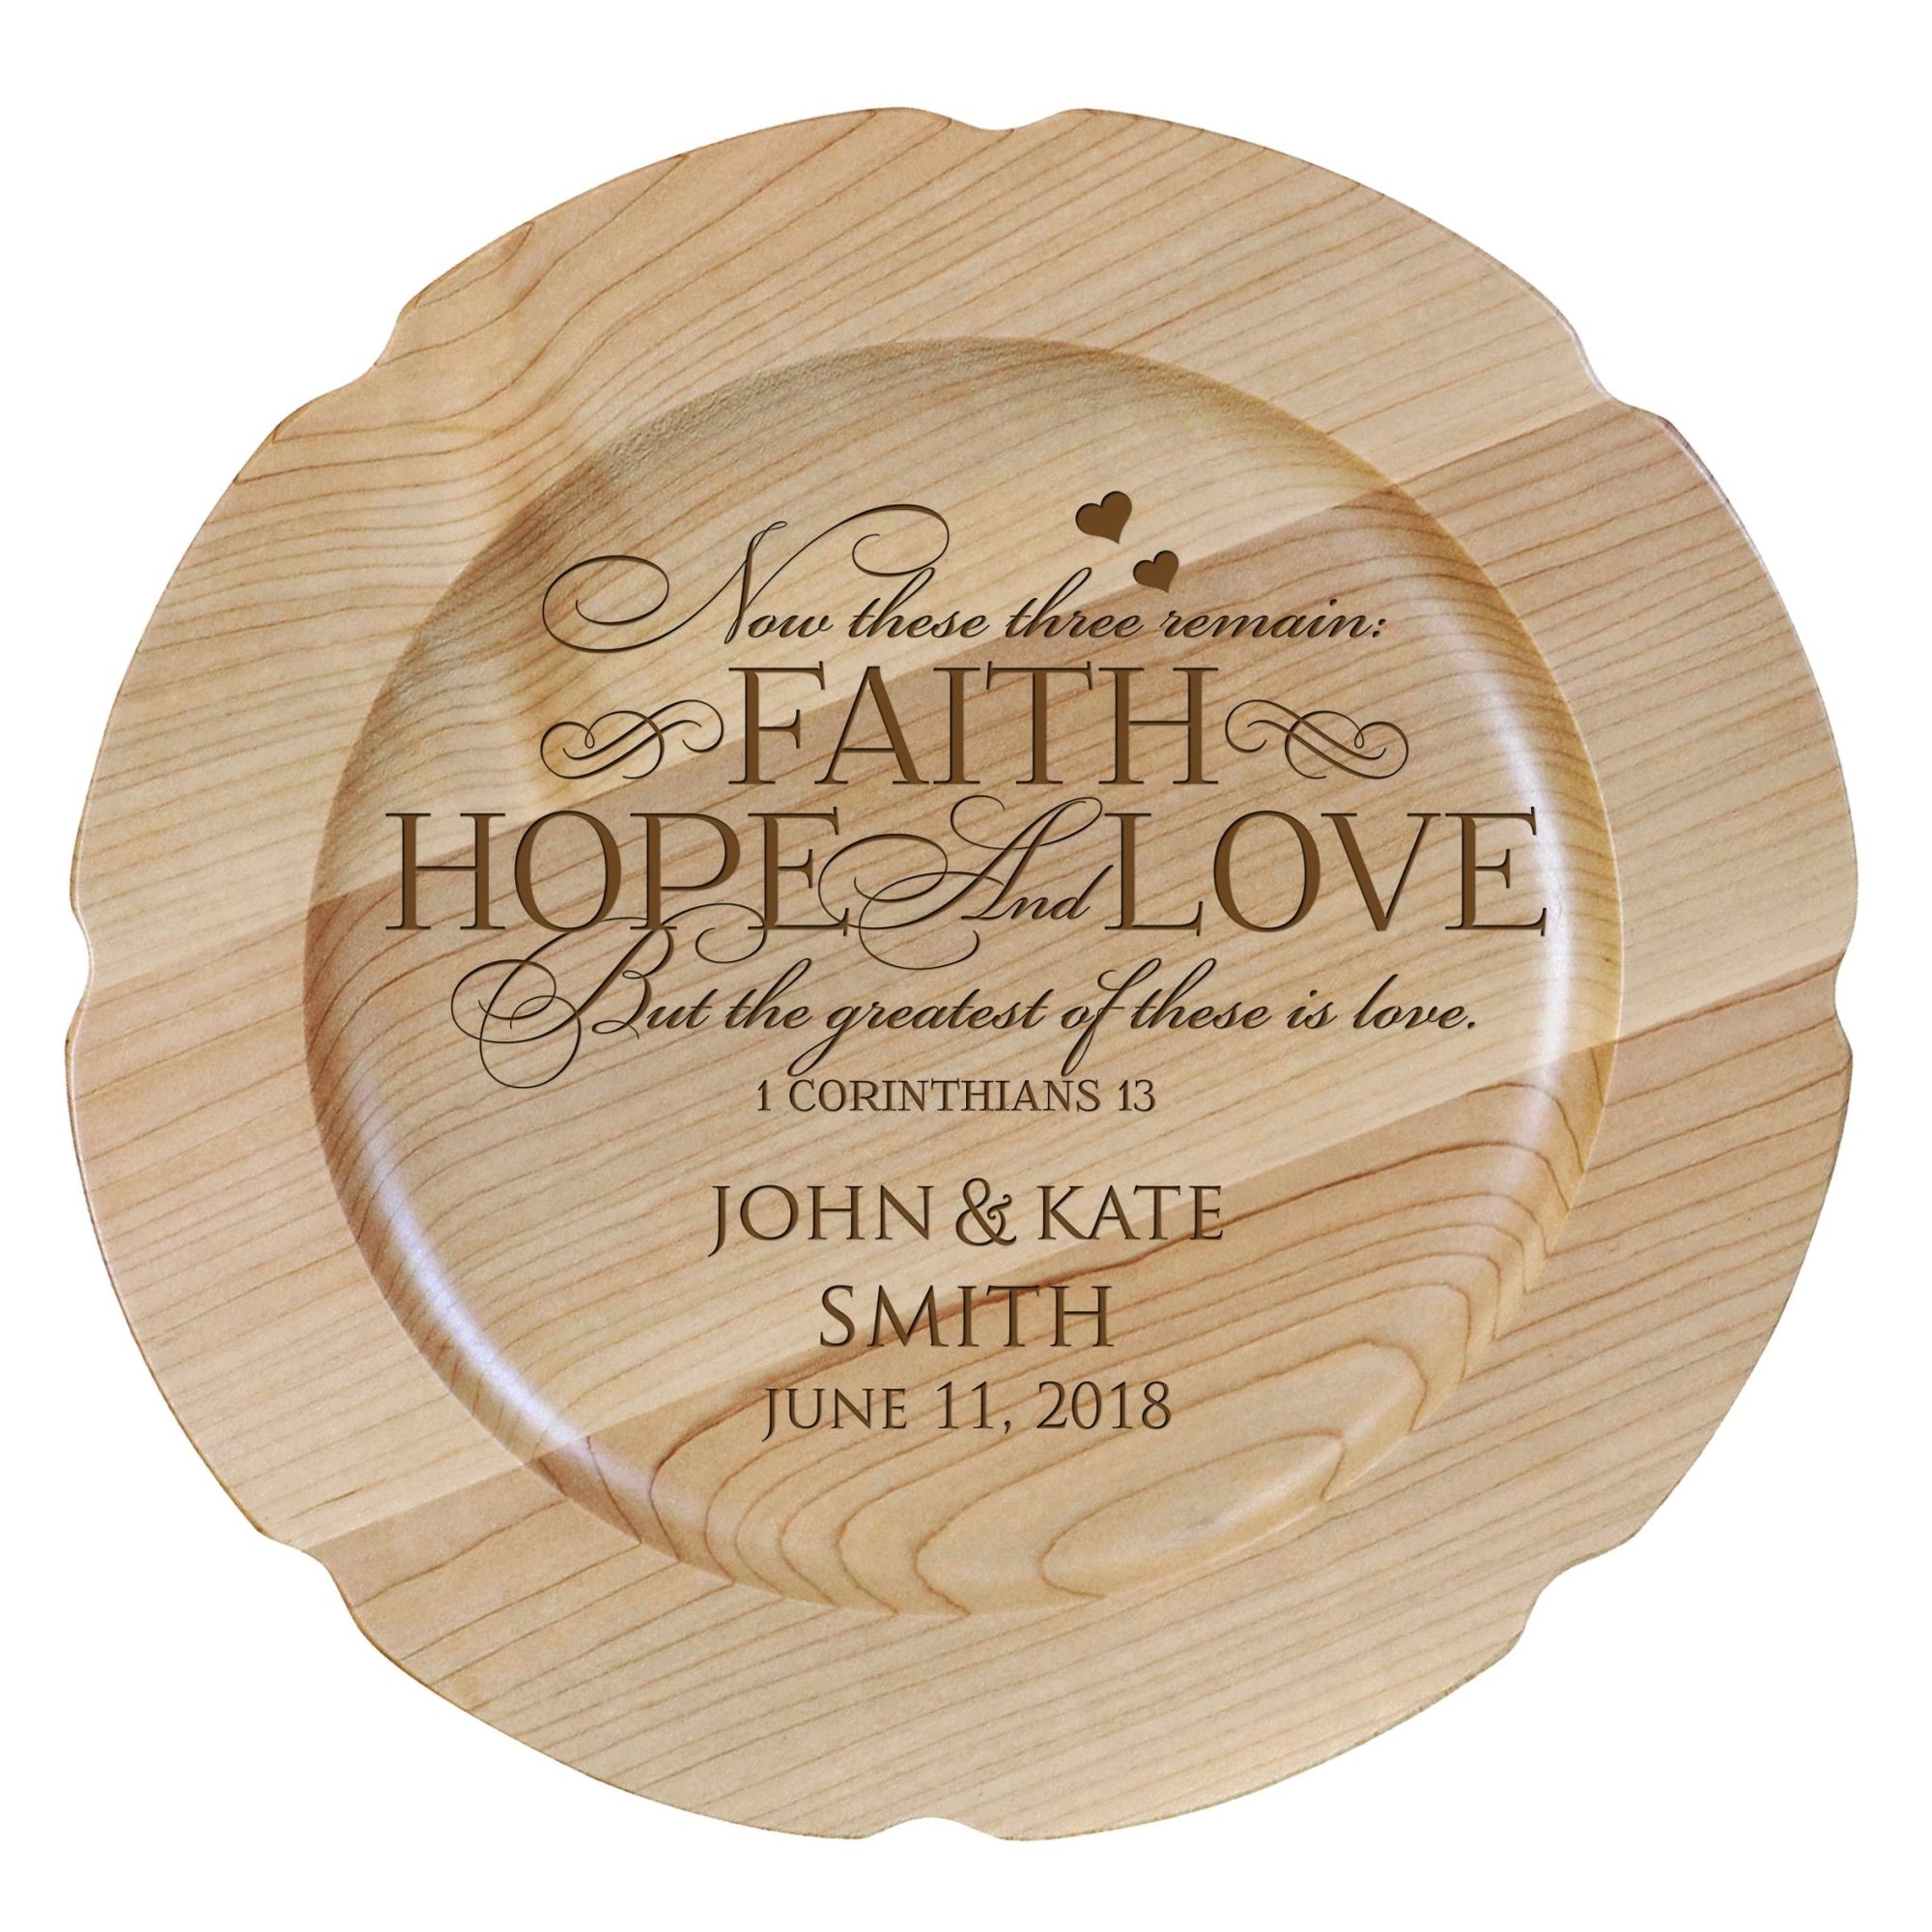 Personalized Inspirational Plates With Quotes - Faith Hope Love - LifeSong Milestones